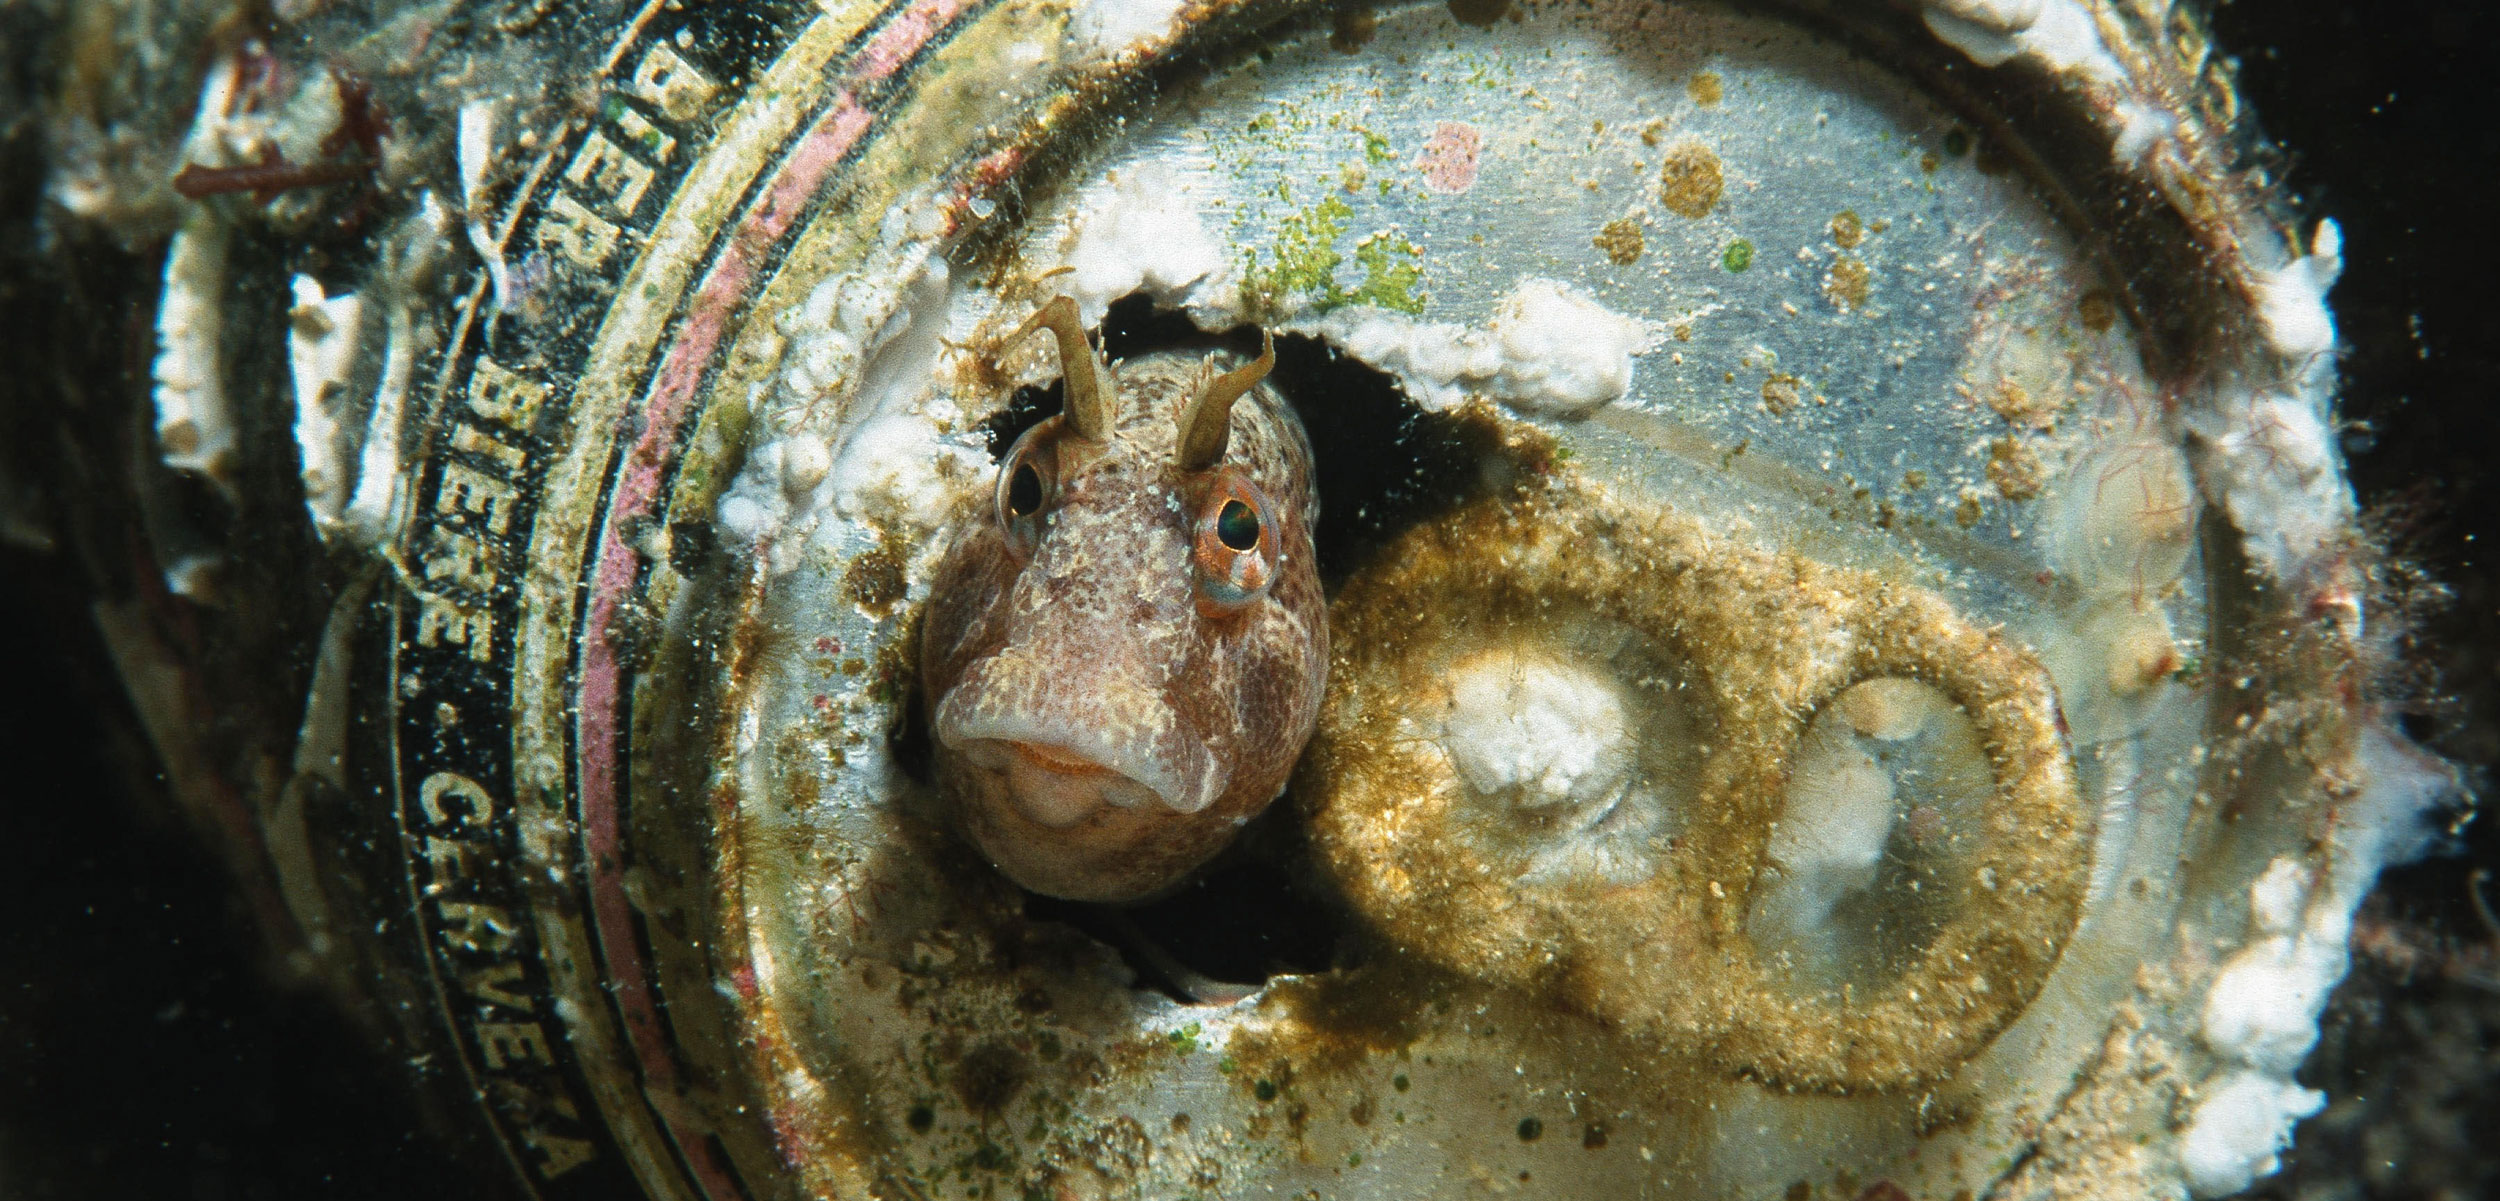 horned blenny (Blennius tentacularis) looking out of a beer can